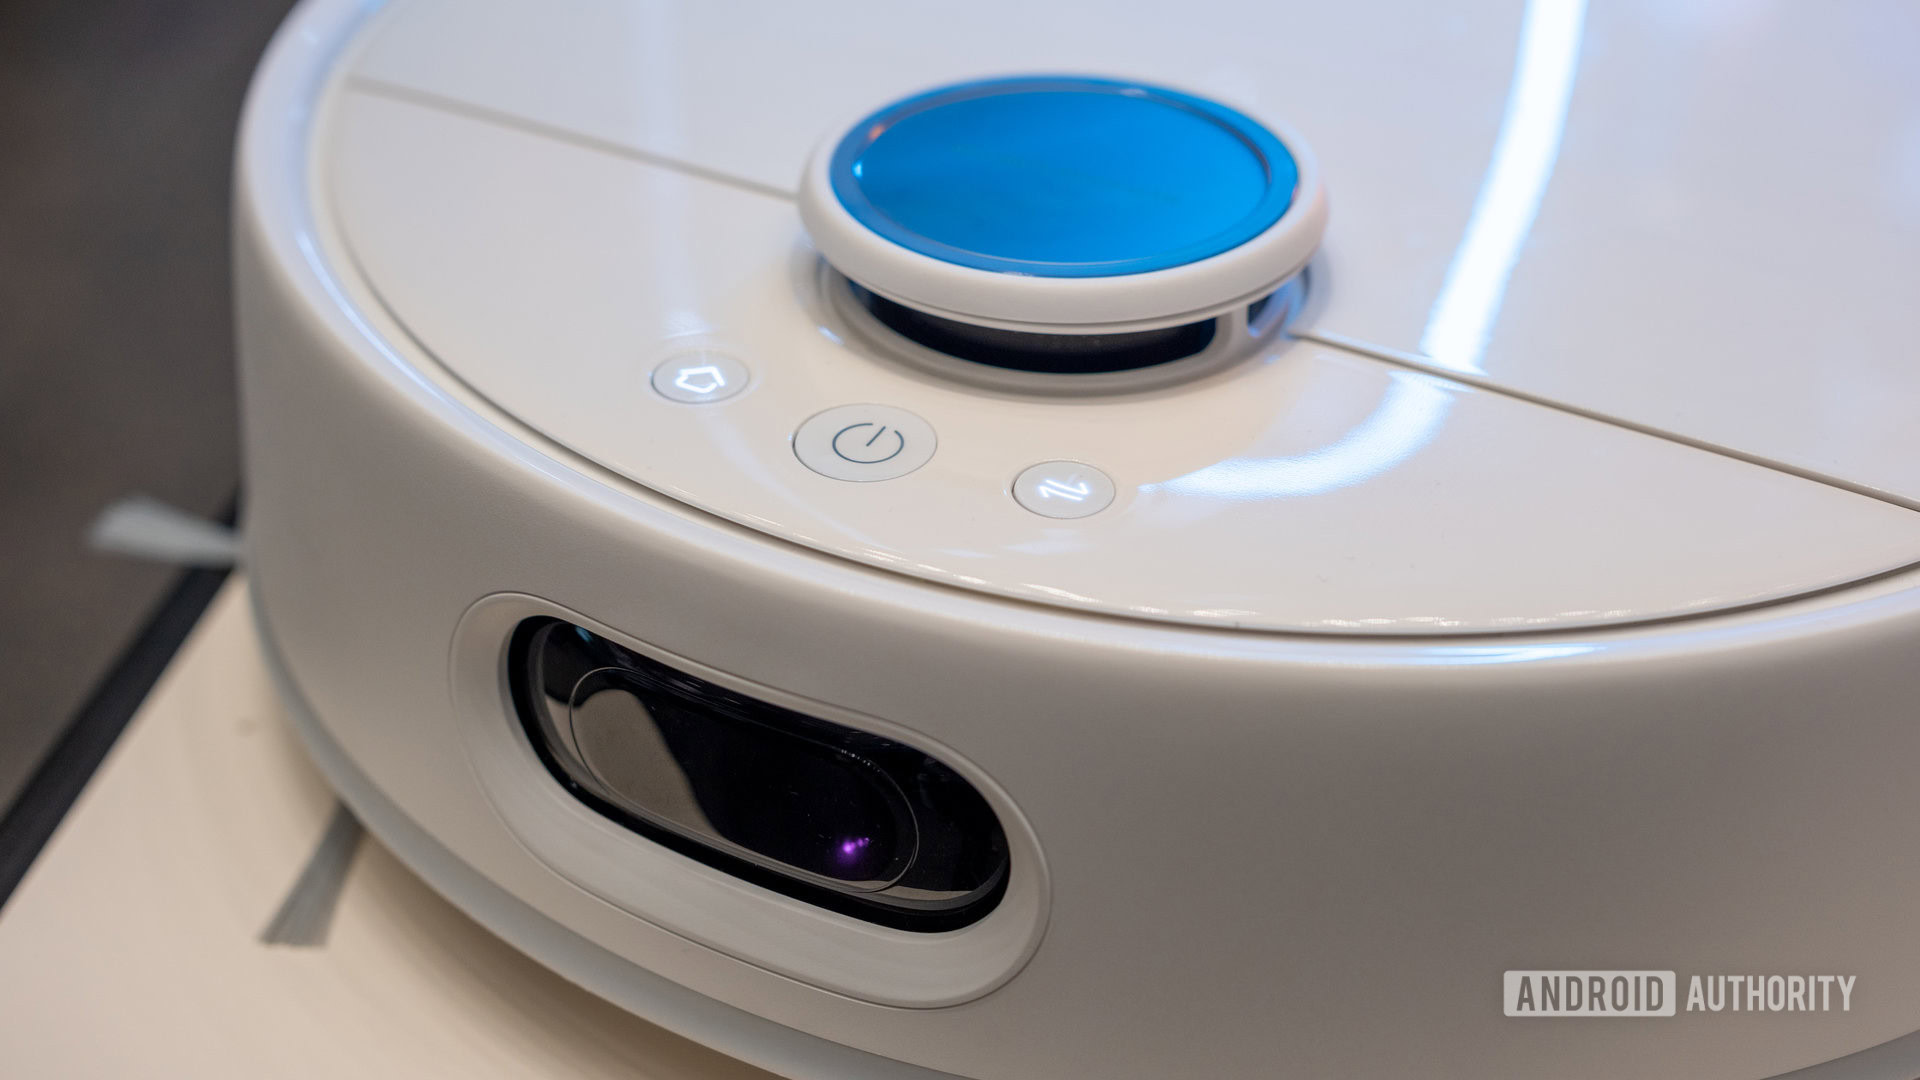 Hands-on with the SwitchBot S10 robot vacuum mop - The Verge